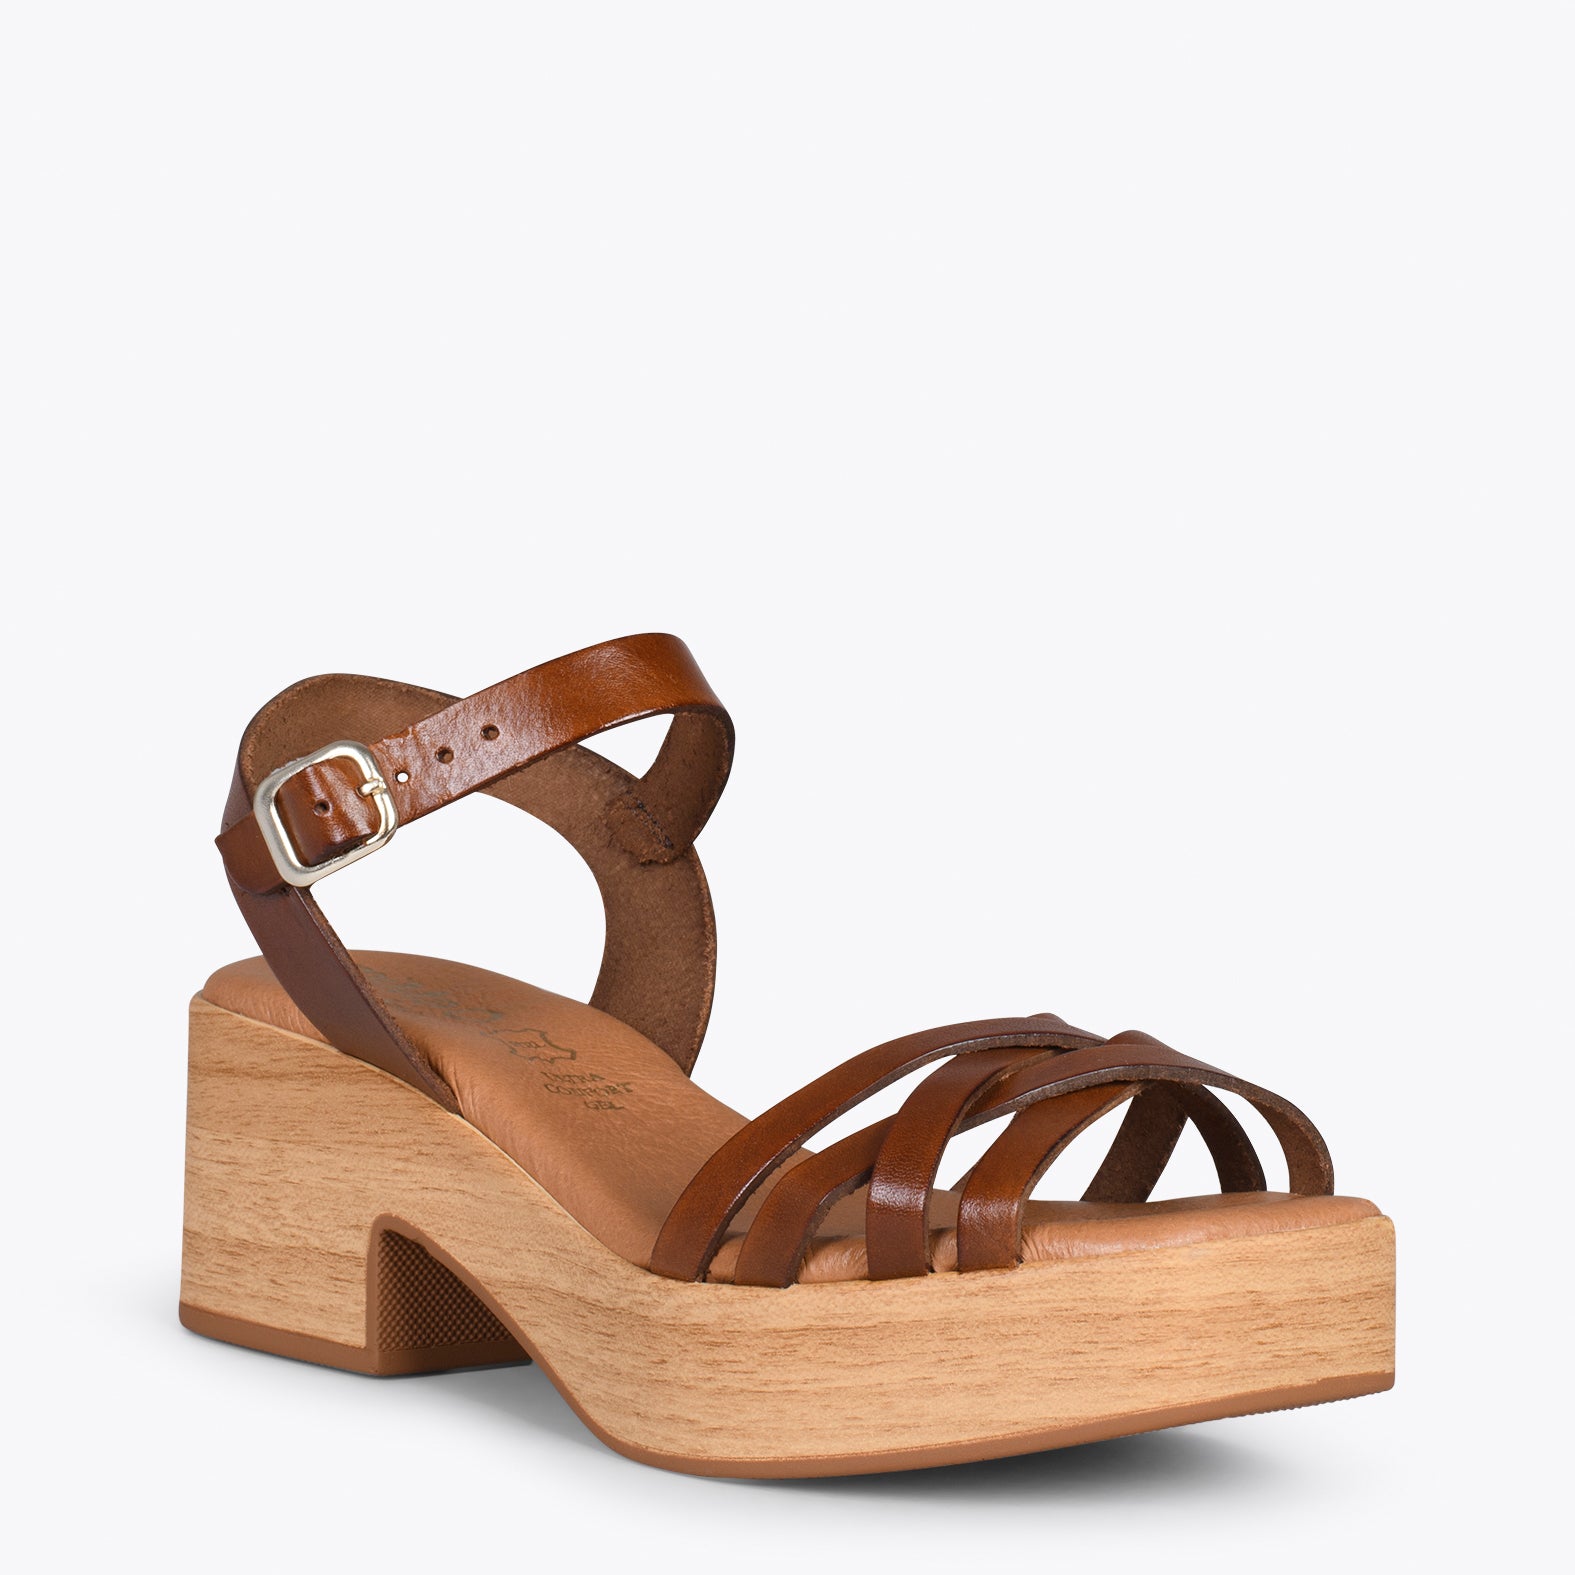 WOOD – BROWN strappy sandal with wooden heel